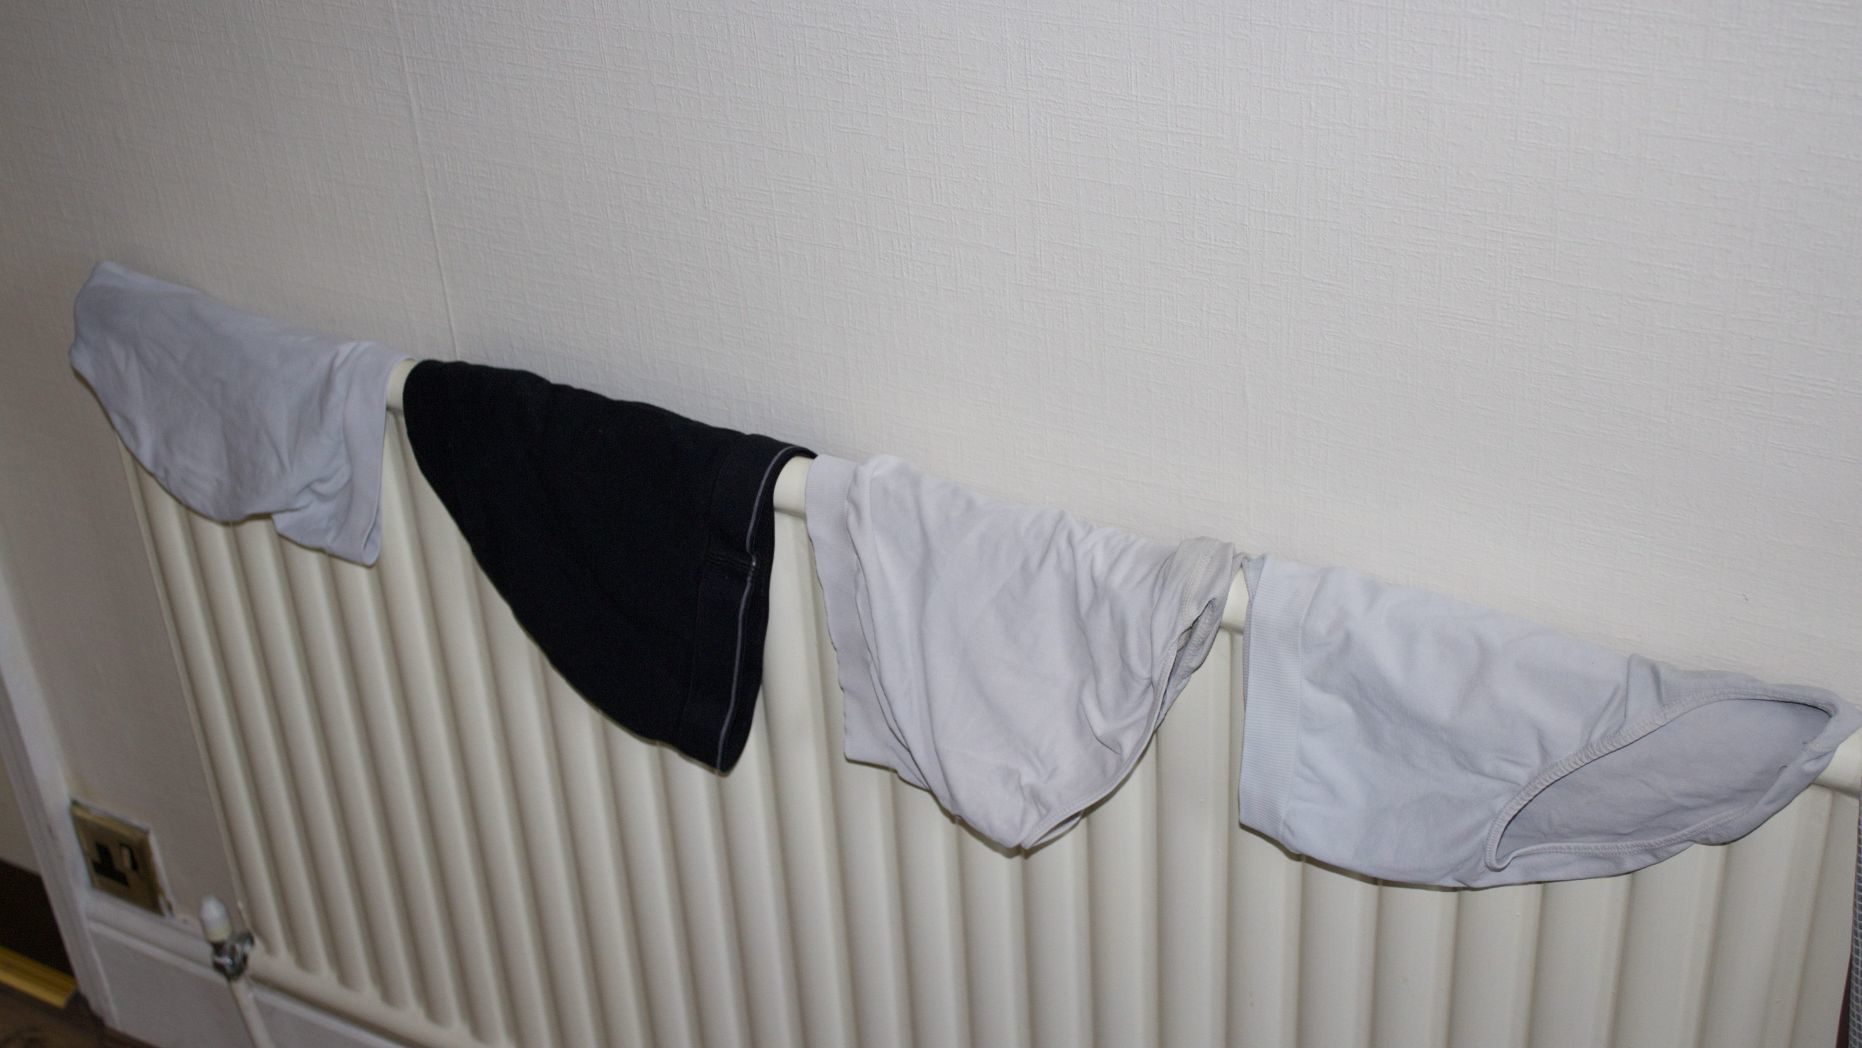 Artist Sells Photo of Father's Underwear for $1300, Dad Embarrassed